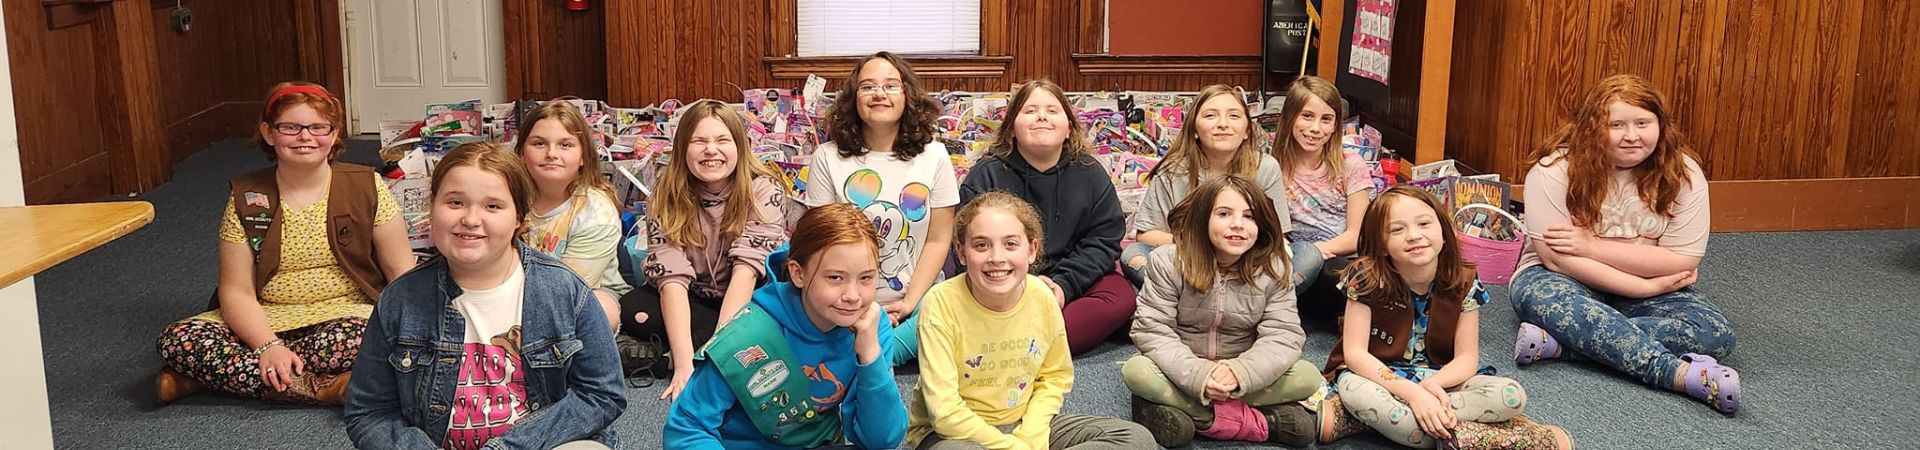  Girl Scouts from Troop 351 surrounded by the Easter baskets they put together 